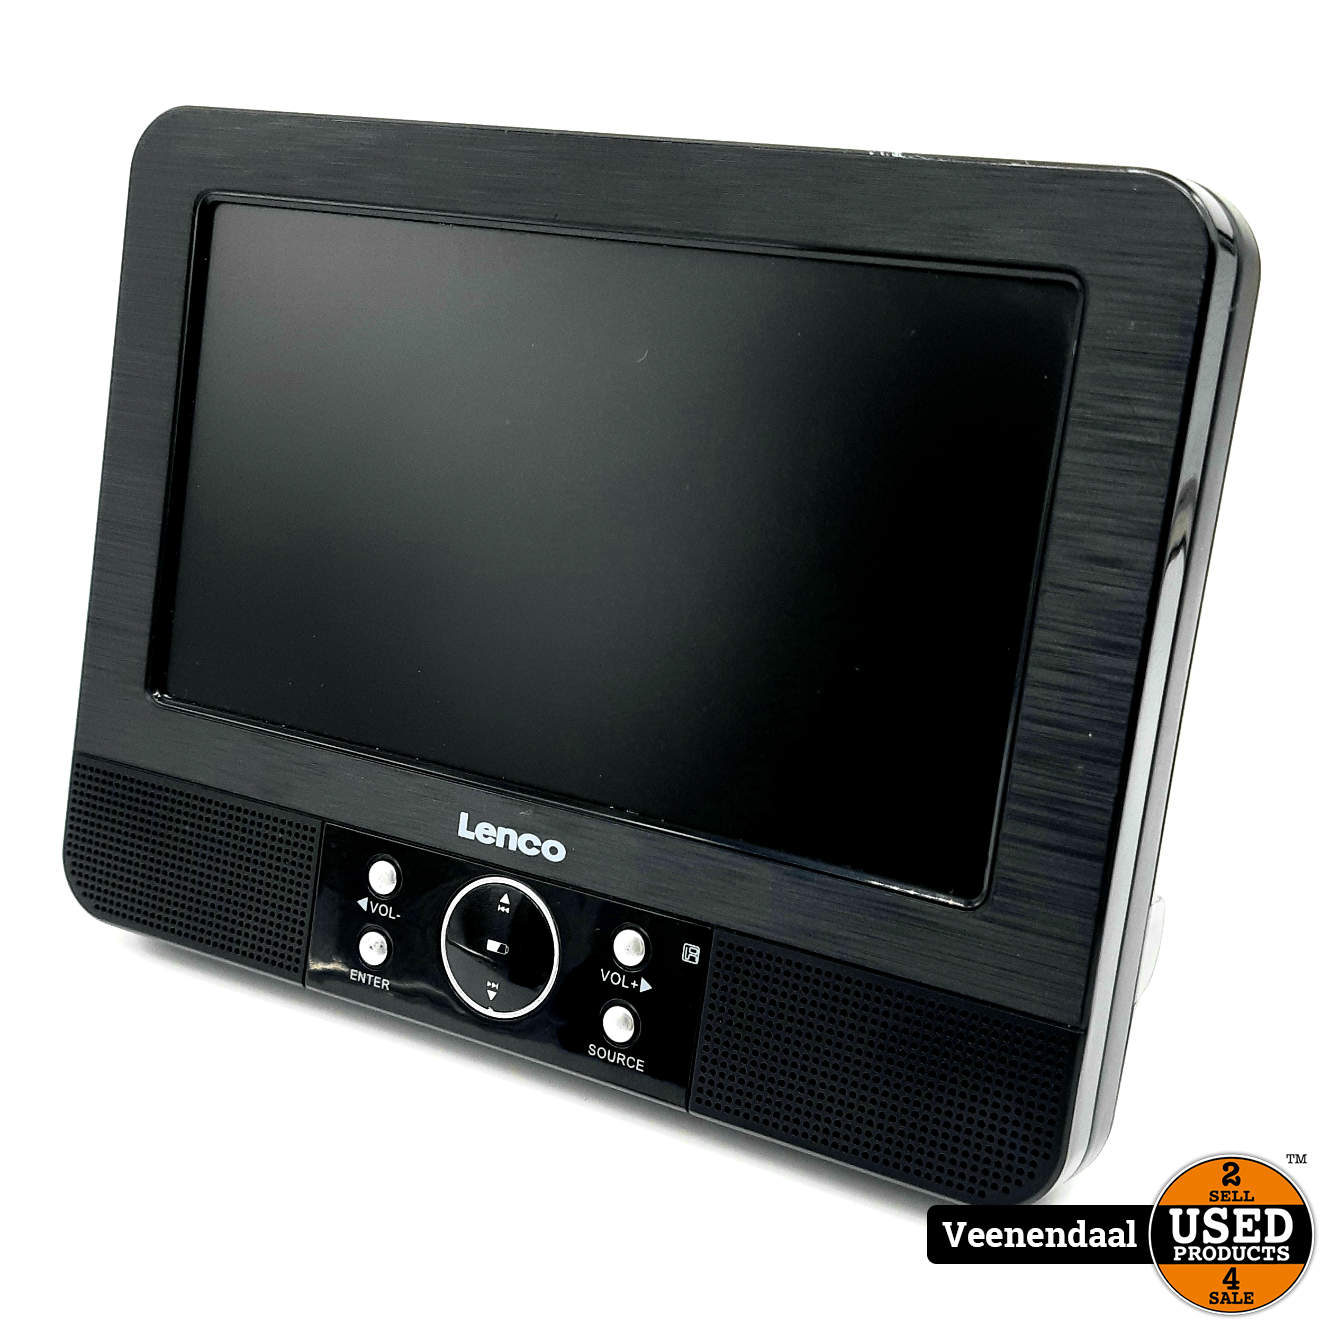 Lenco portable DVD-Speler - In Staat - Products Veenendaal